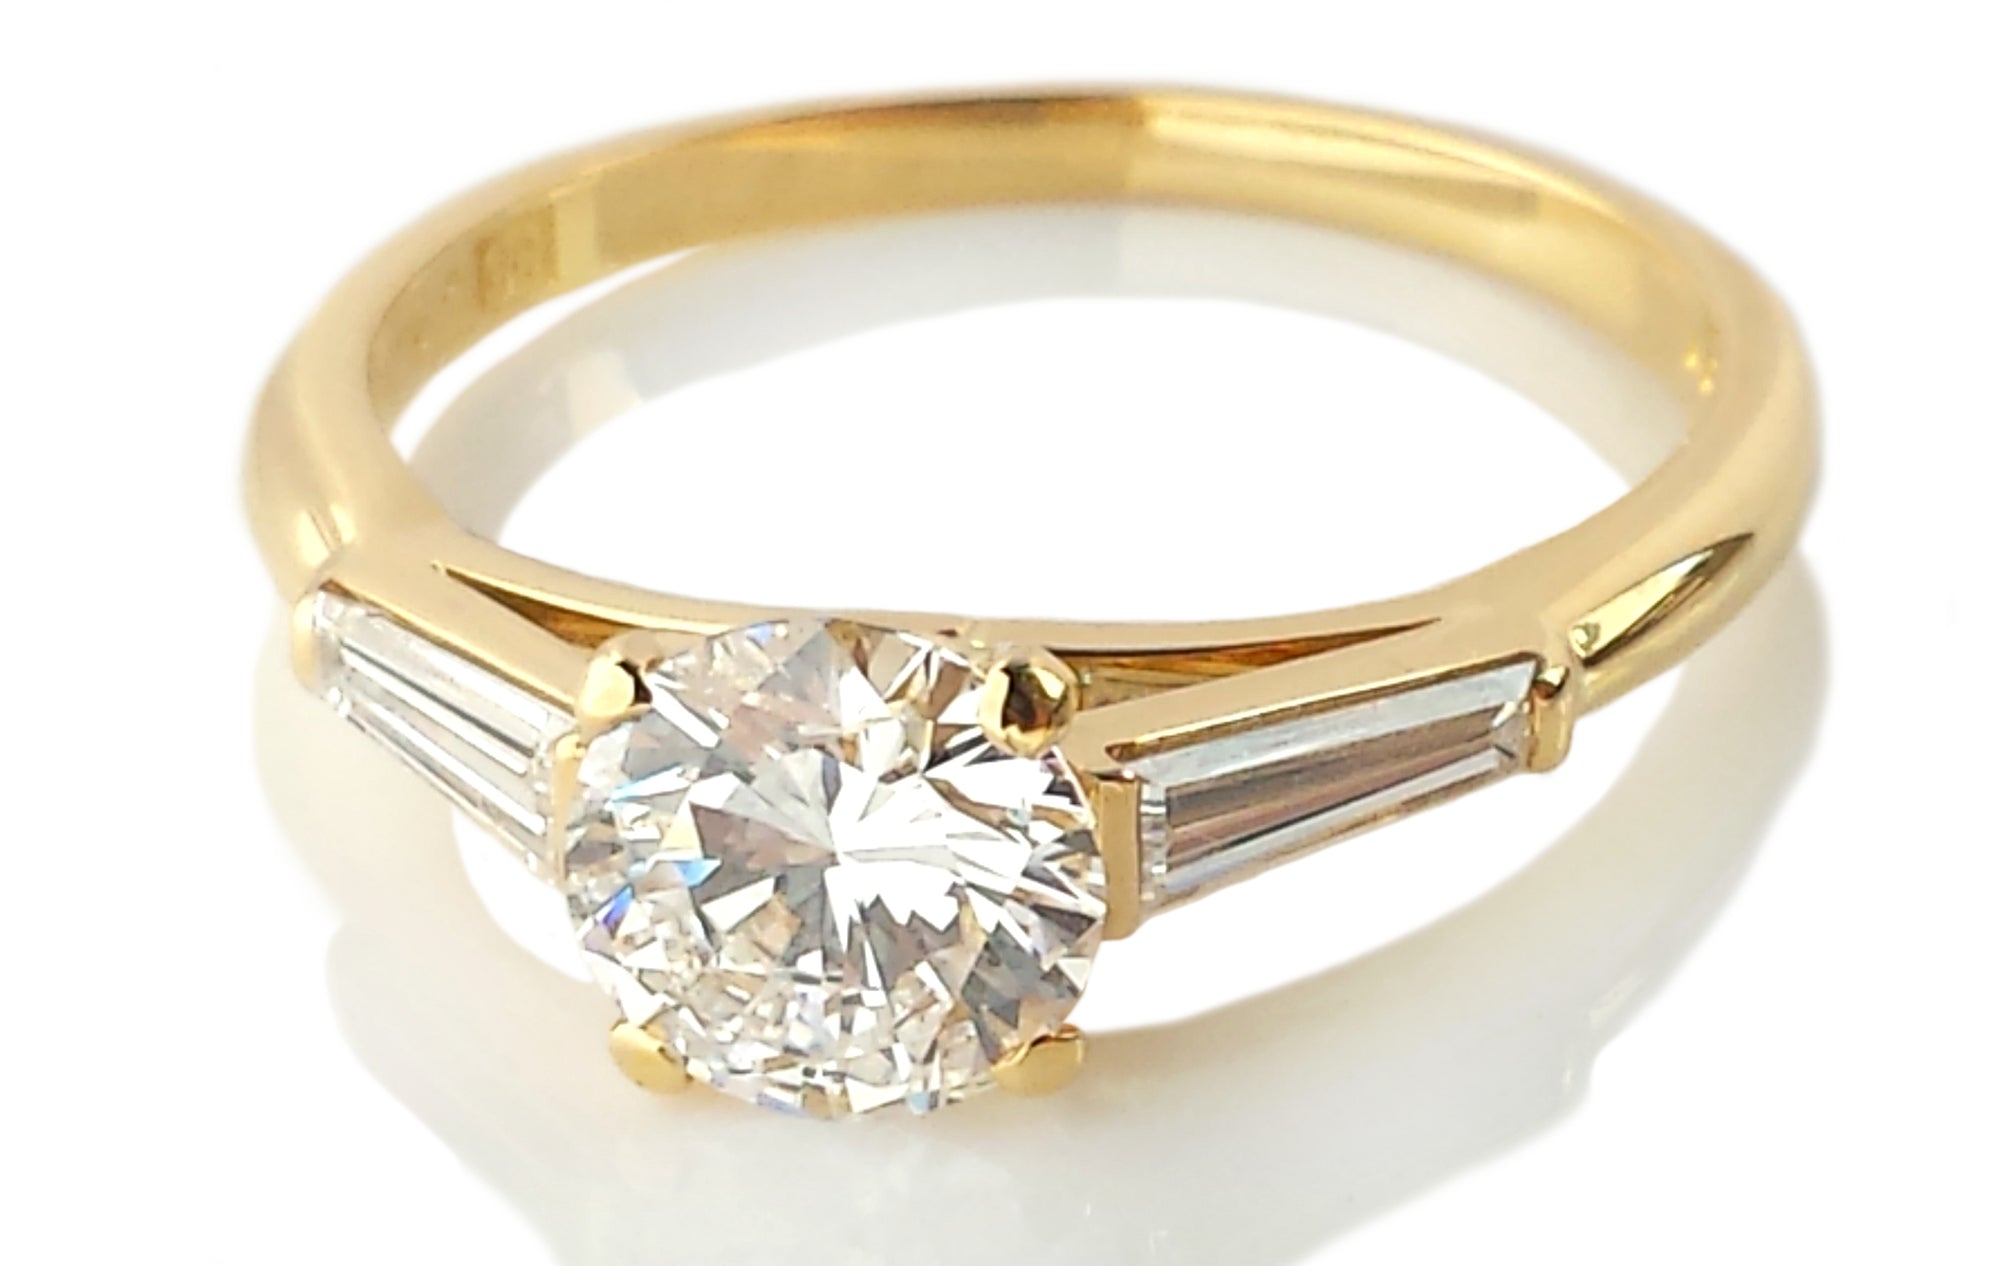 Vintage Cartier 1.01ct D/VVS2 Round Brilliant & Tapered Baguette Diamond Engagement Ring in 18K Gold